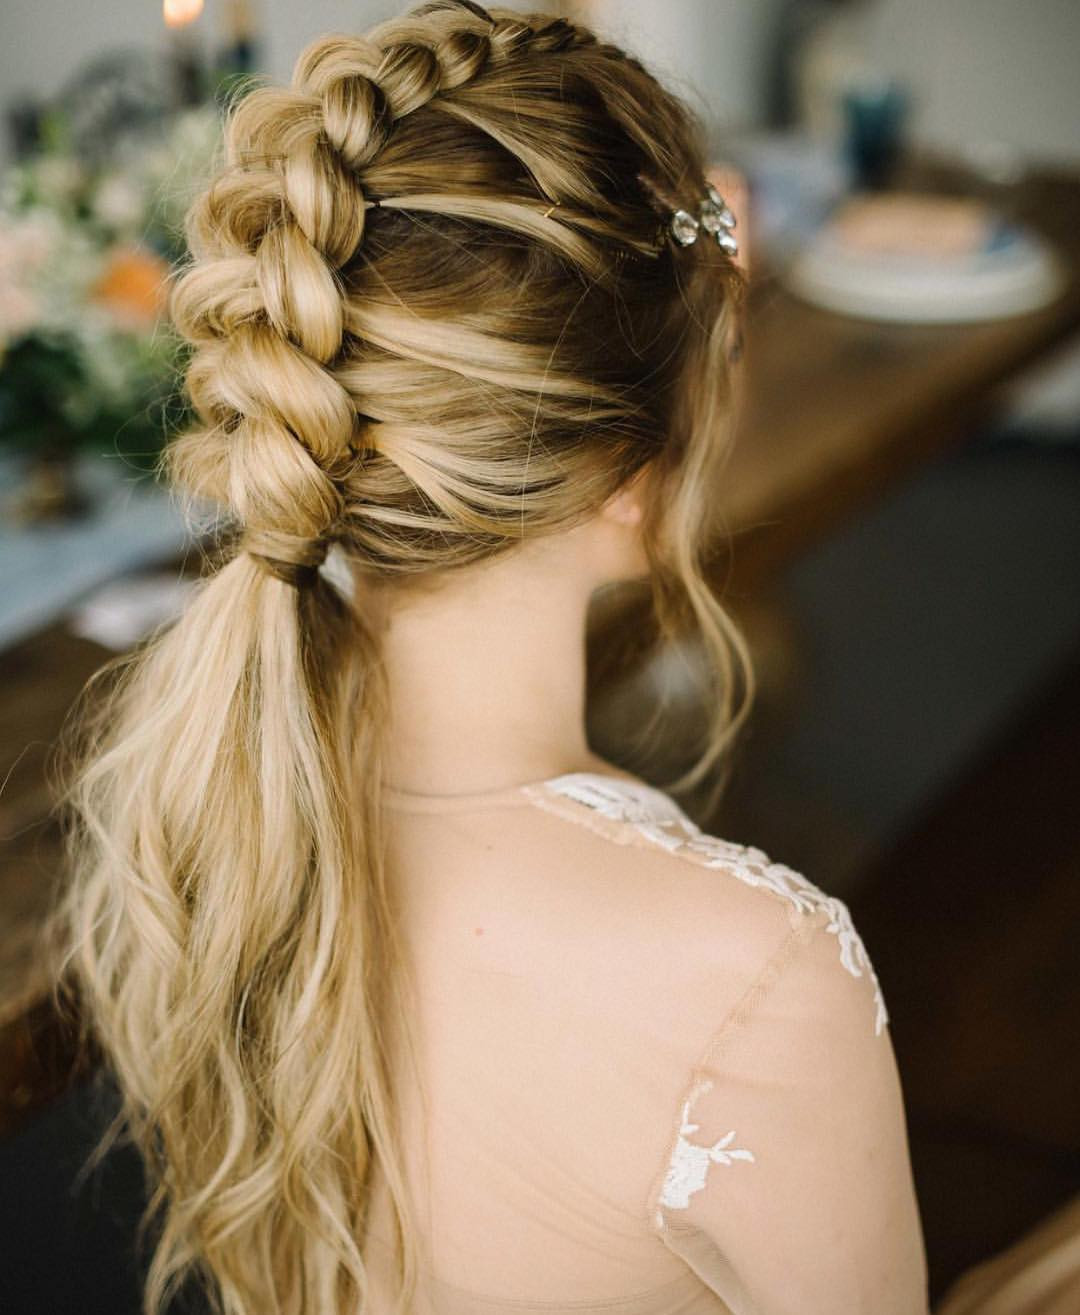 Hairstyles For Long Hair With Braids
 10 Braided Hairstyles for Long Hair Weddings Festivals